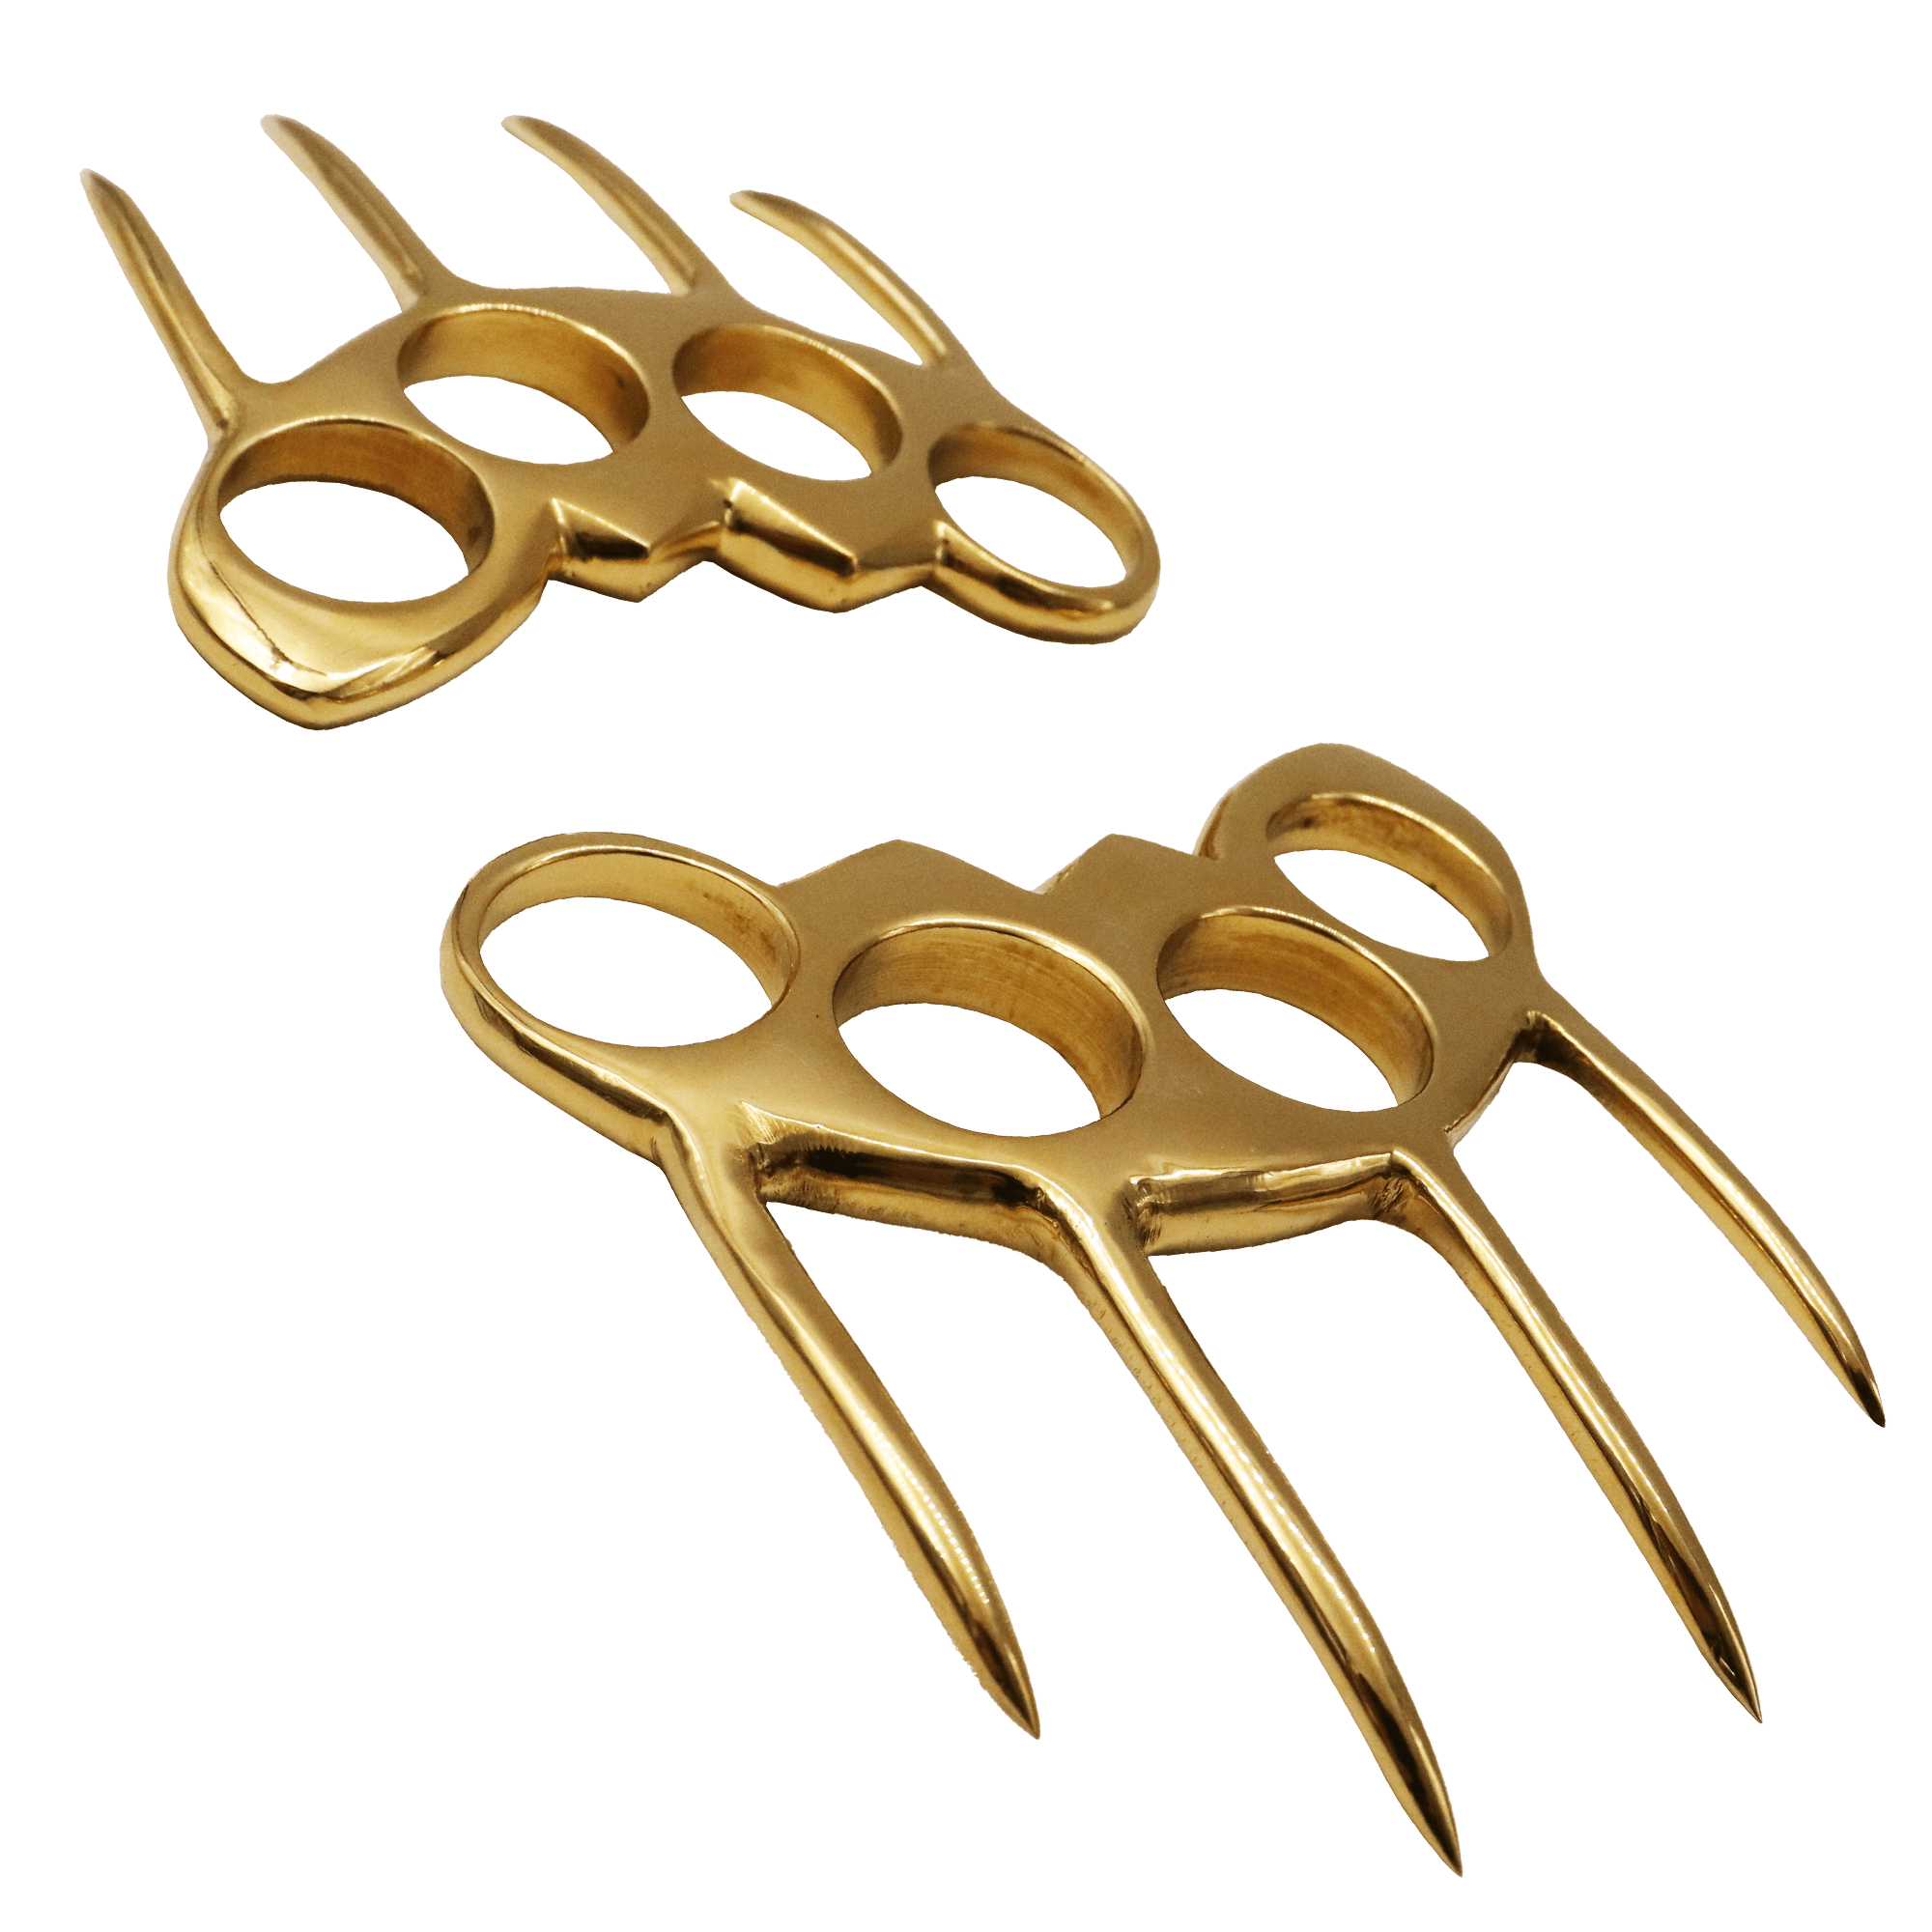 Scorpion Hunter Knuckles - Spiked Knuckle Duster - Scorpion Brass